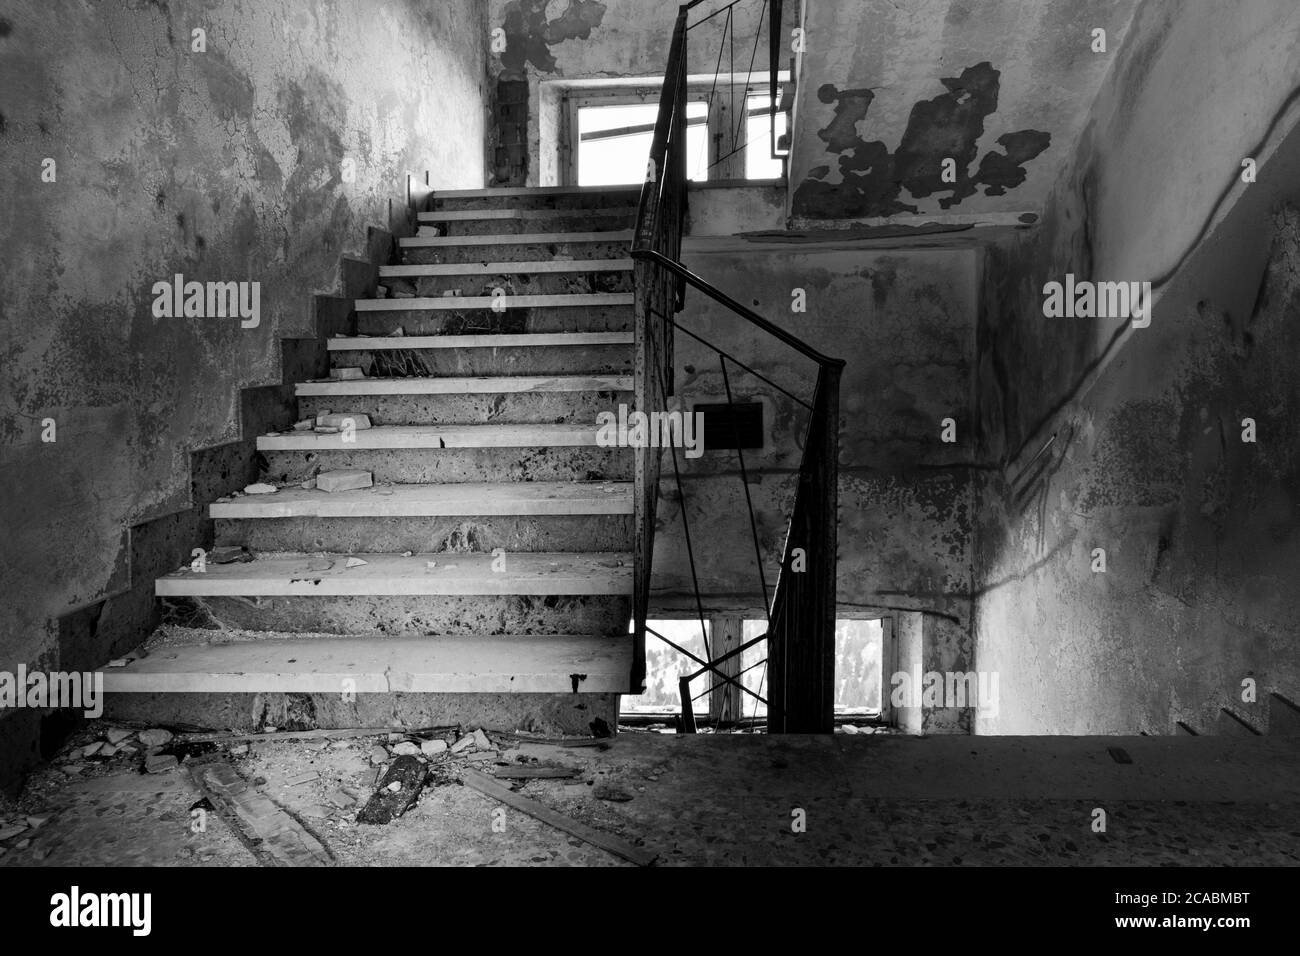 Black and white image of stairway covered in rubble, mold and stains on the walls. Abandoned building located on Monte Grappa (Veneto, Italy) Stock Photo